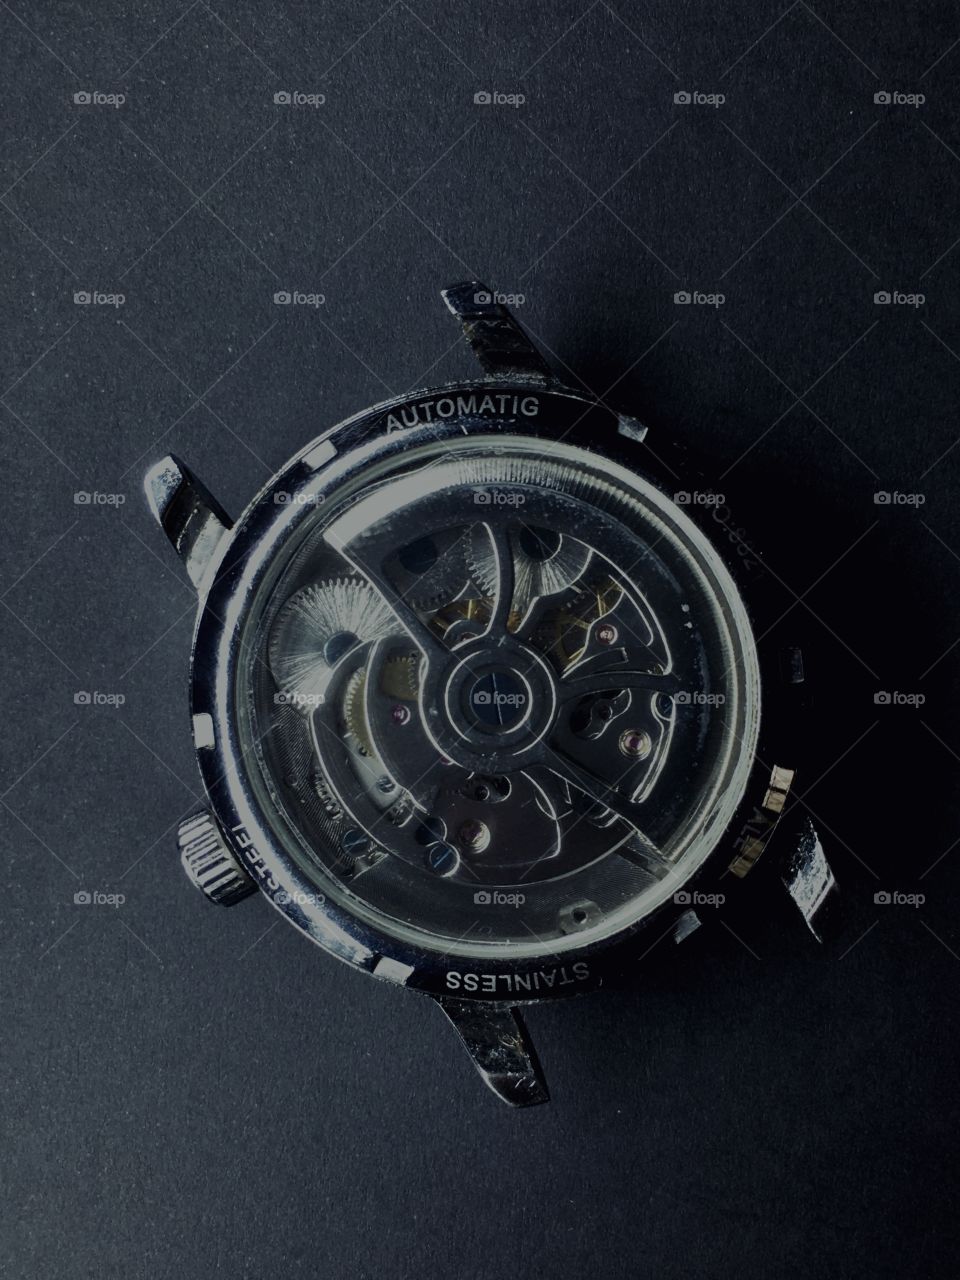 product photography sample (automatic watch)